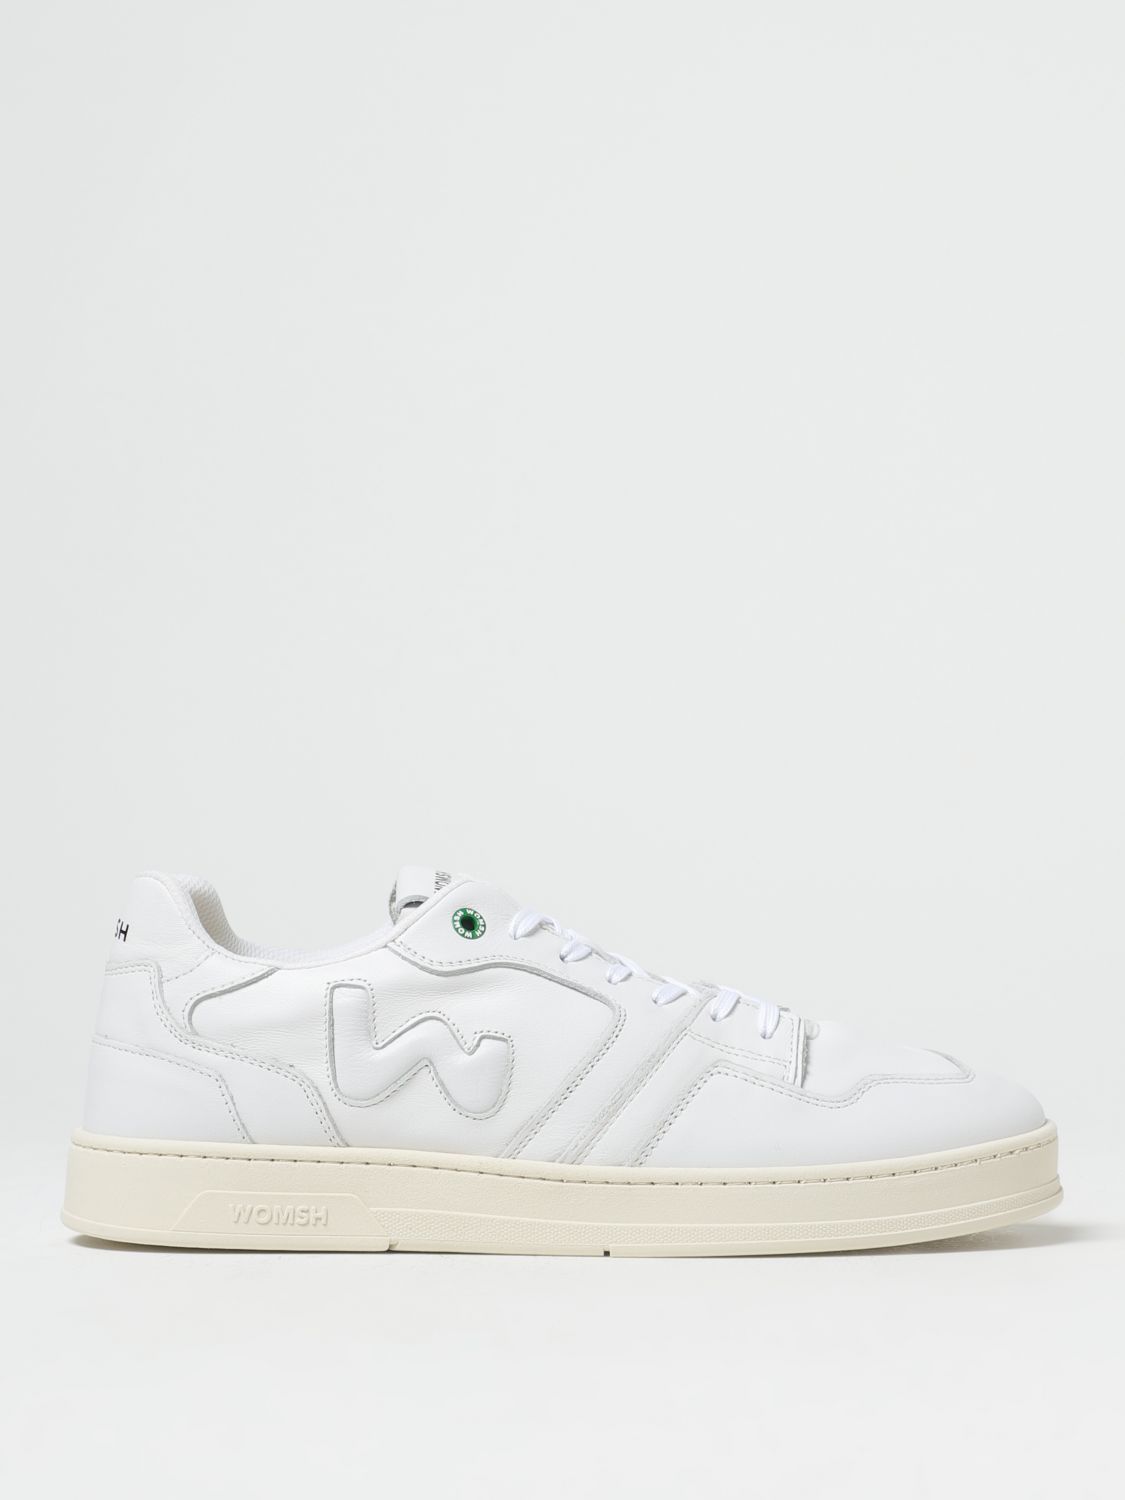 Womsh Trainers WOMSH Men colour White